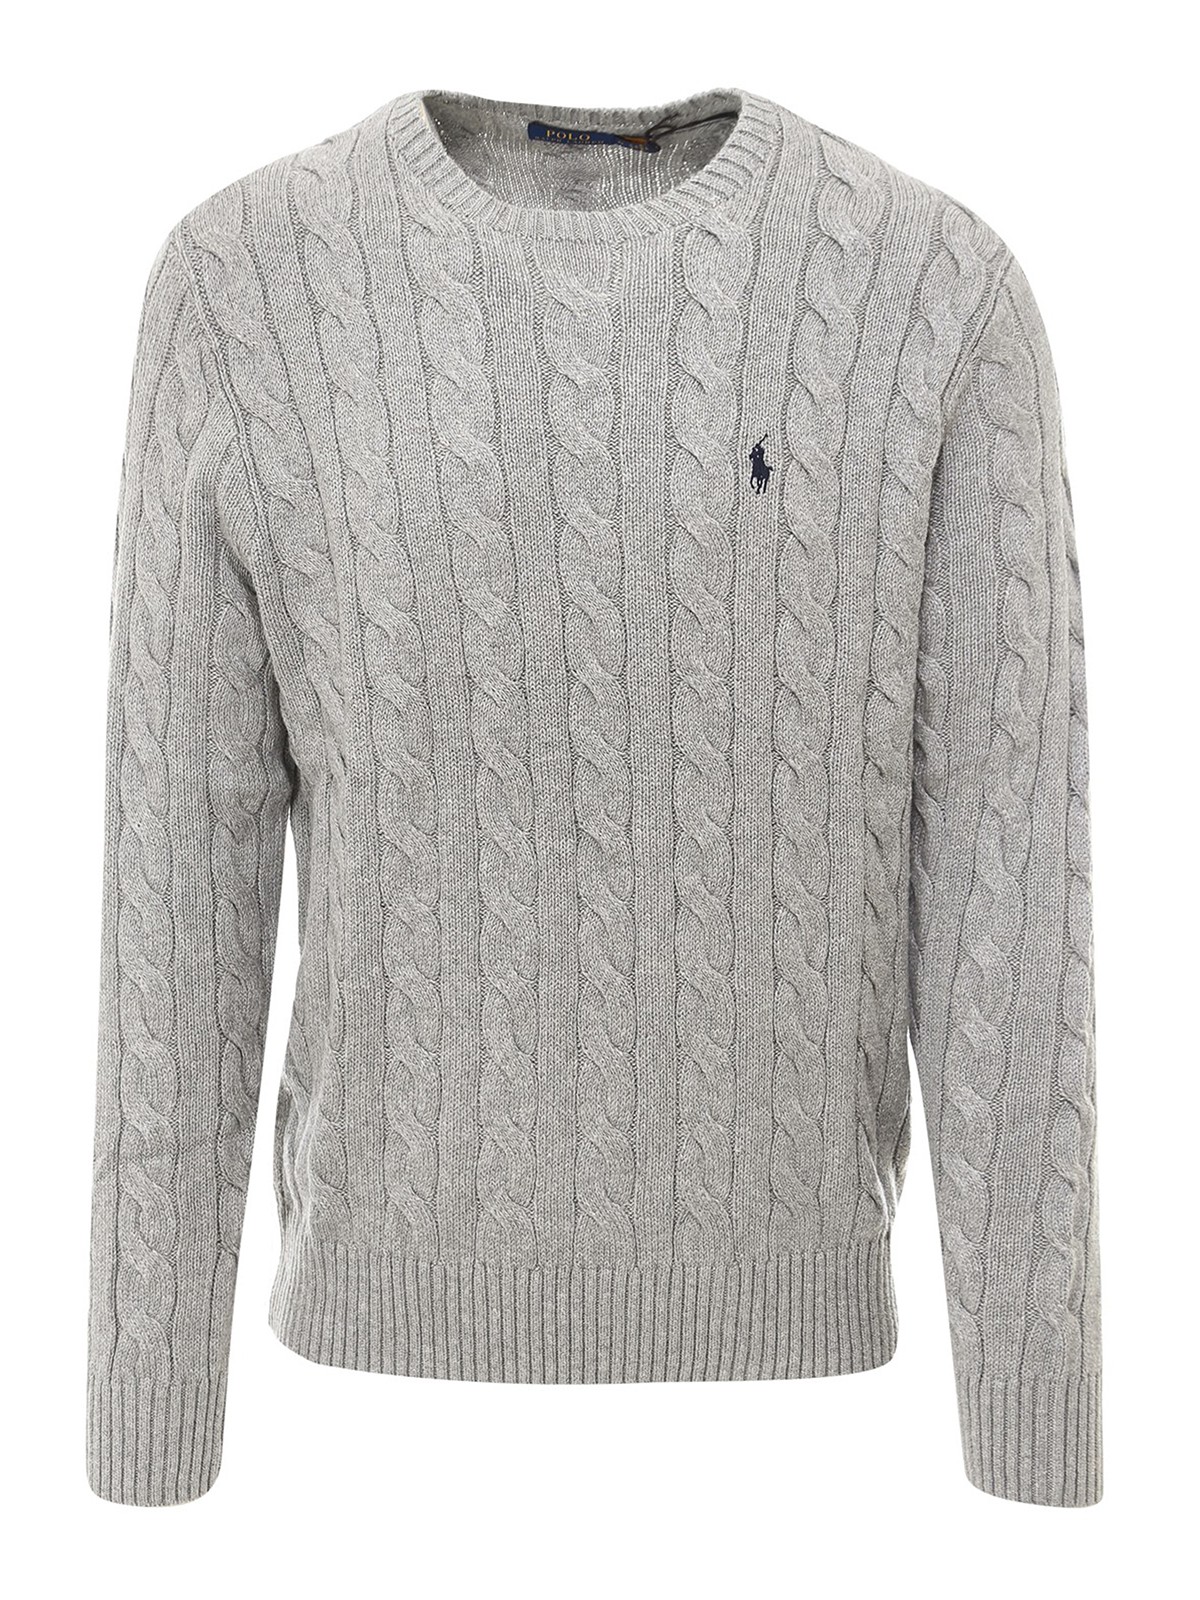 Polo Ralph Lauren Cable Knit Sweater In Grey